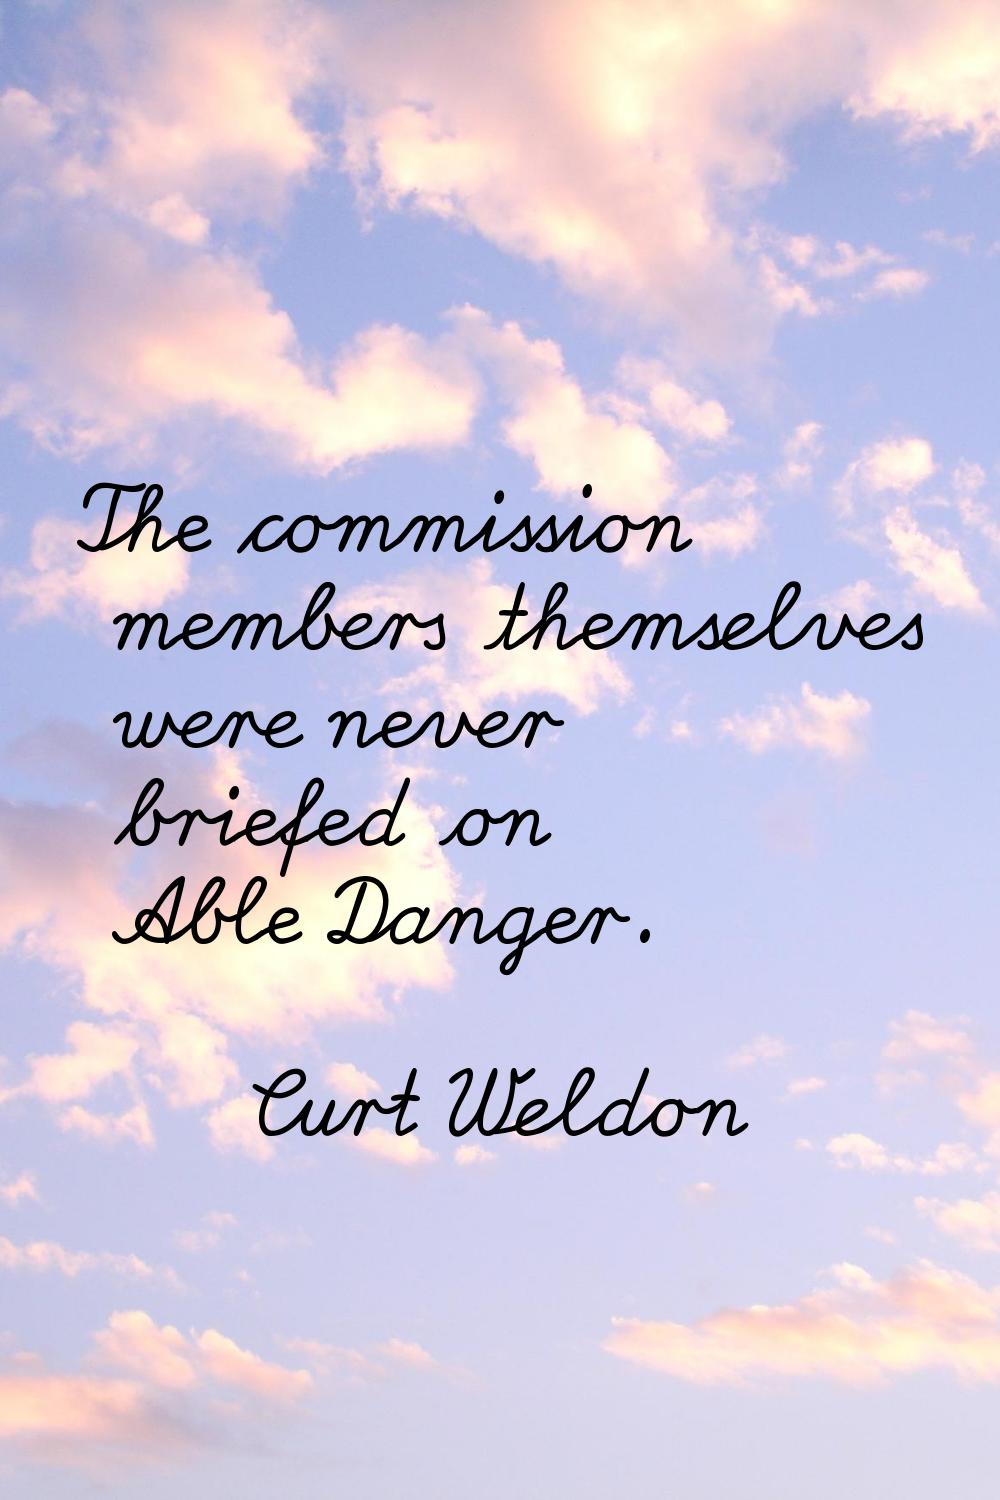 The commission members themselves were never briefed on Able Danger.